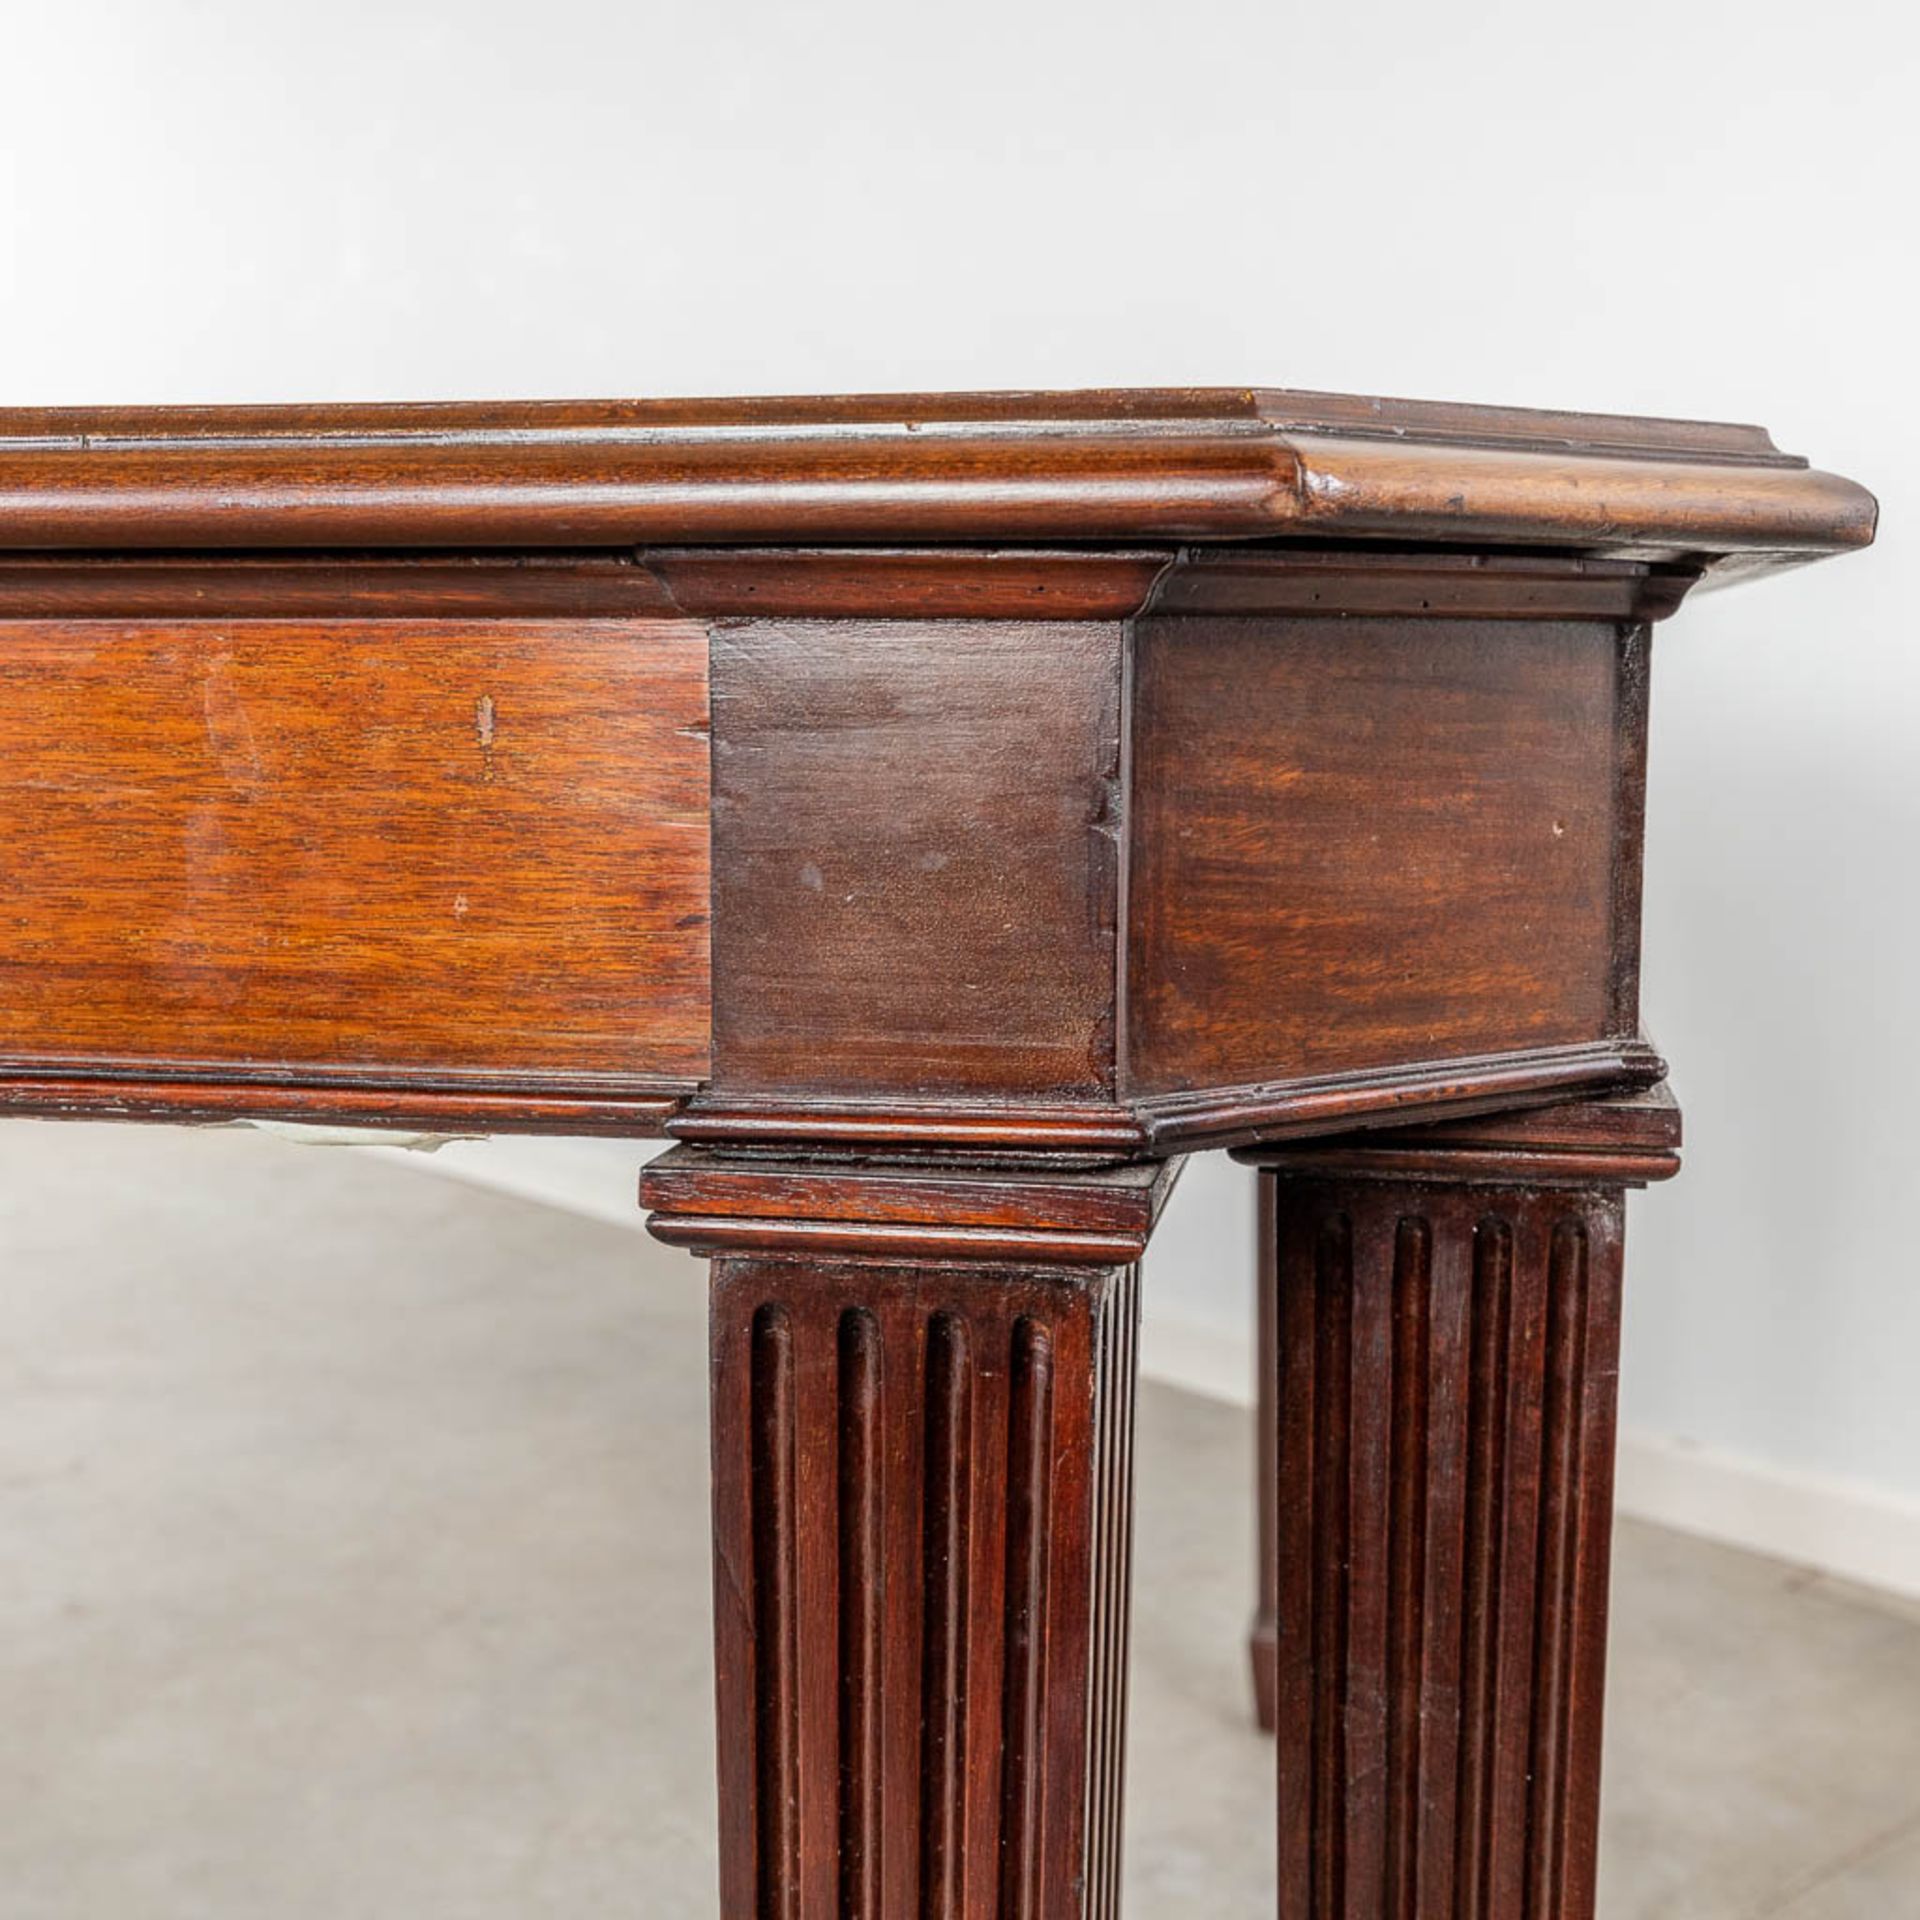 An exceptionally large English conference room table, mahogany. 19th C. (D:147 x W:455 x H:78 cm) - Image 8 of 10